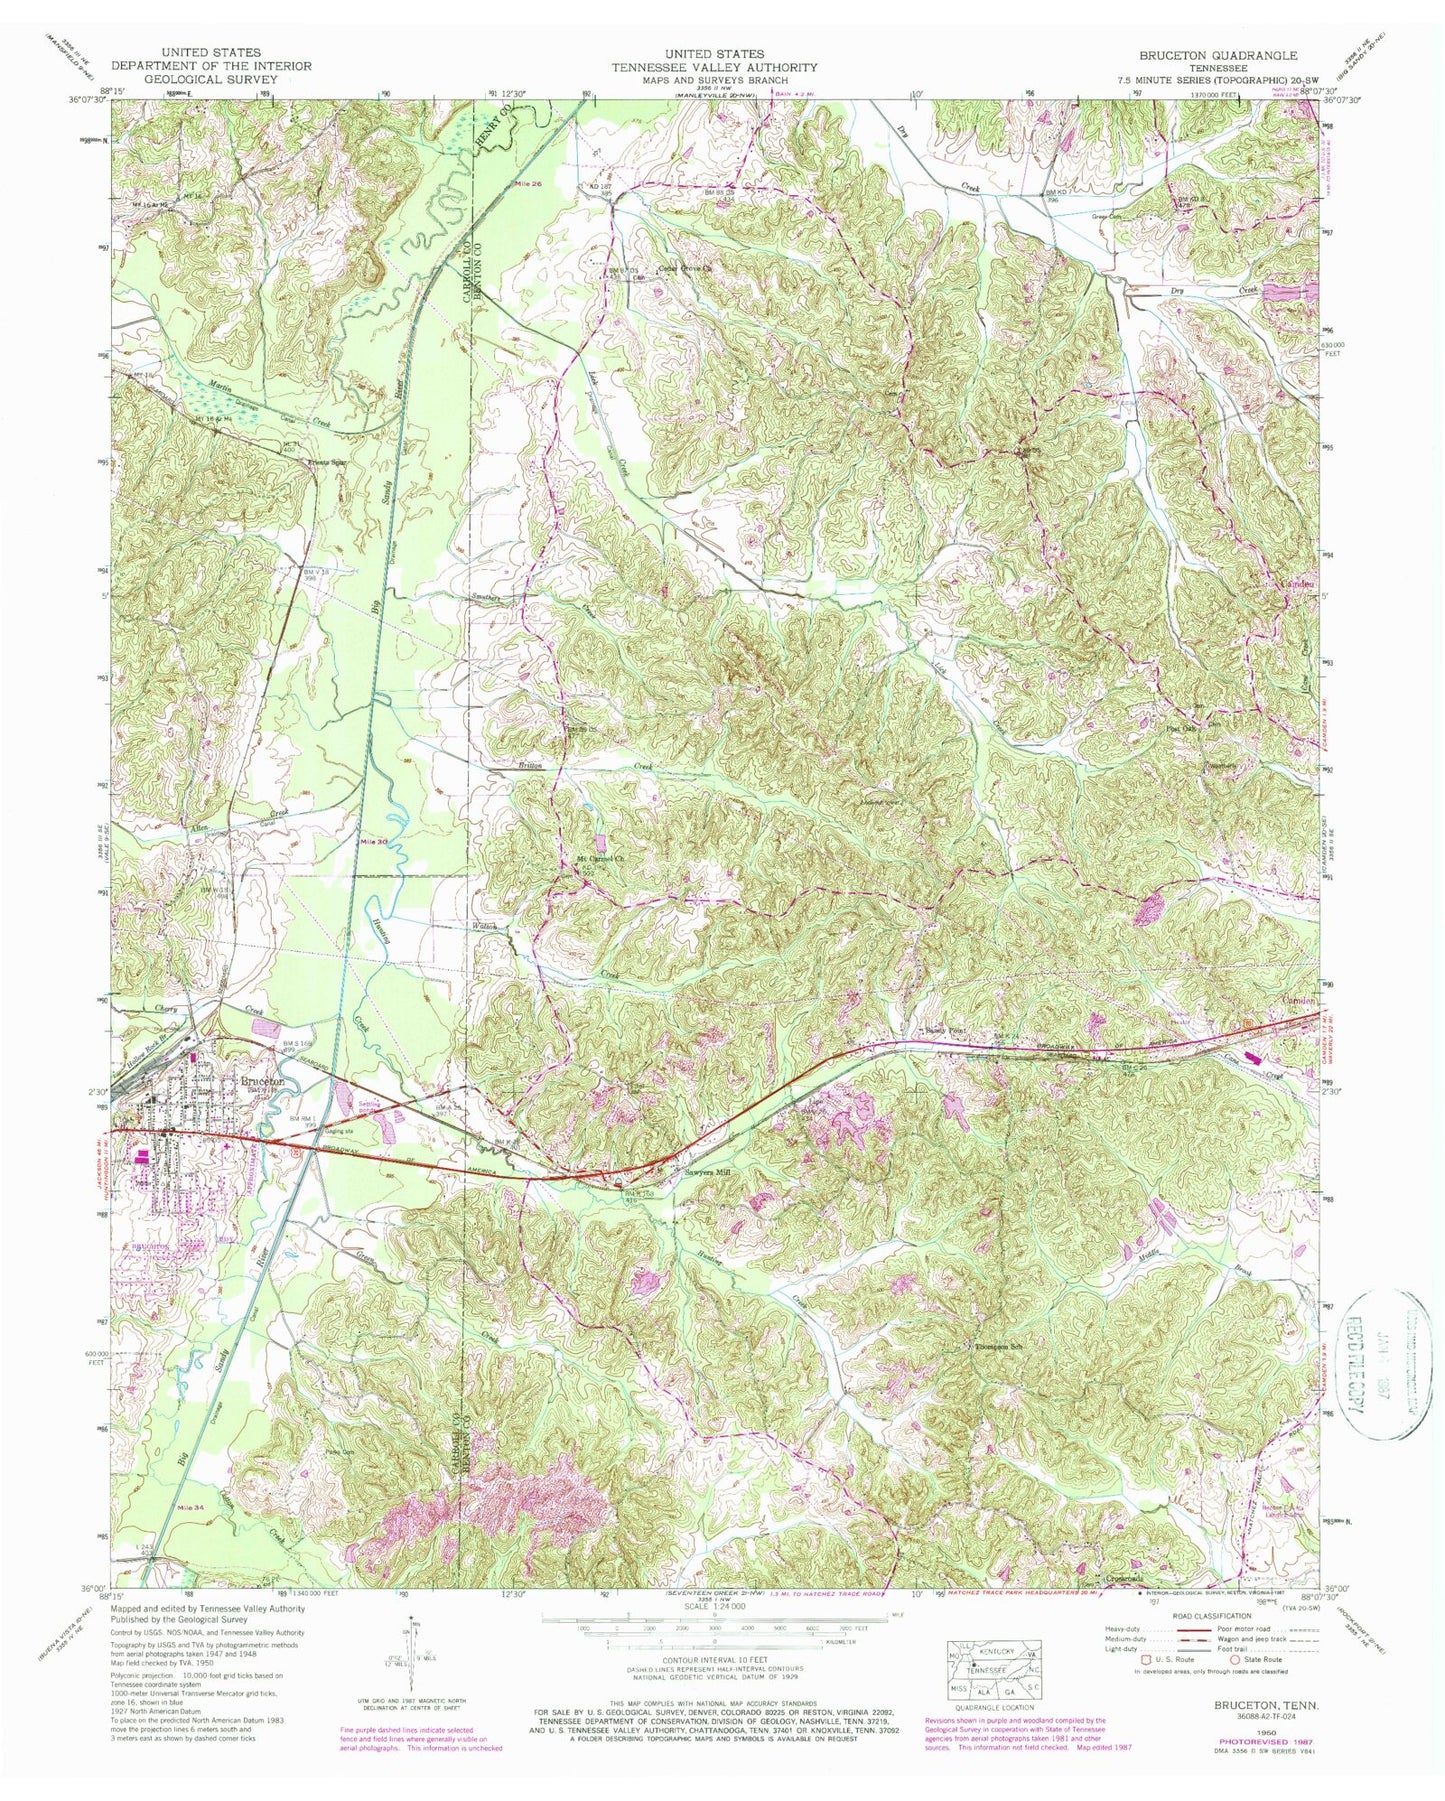 Classic USGS Bruceton Tennessee 7.5'x7.5' Topo Map Image